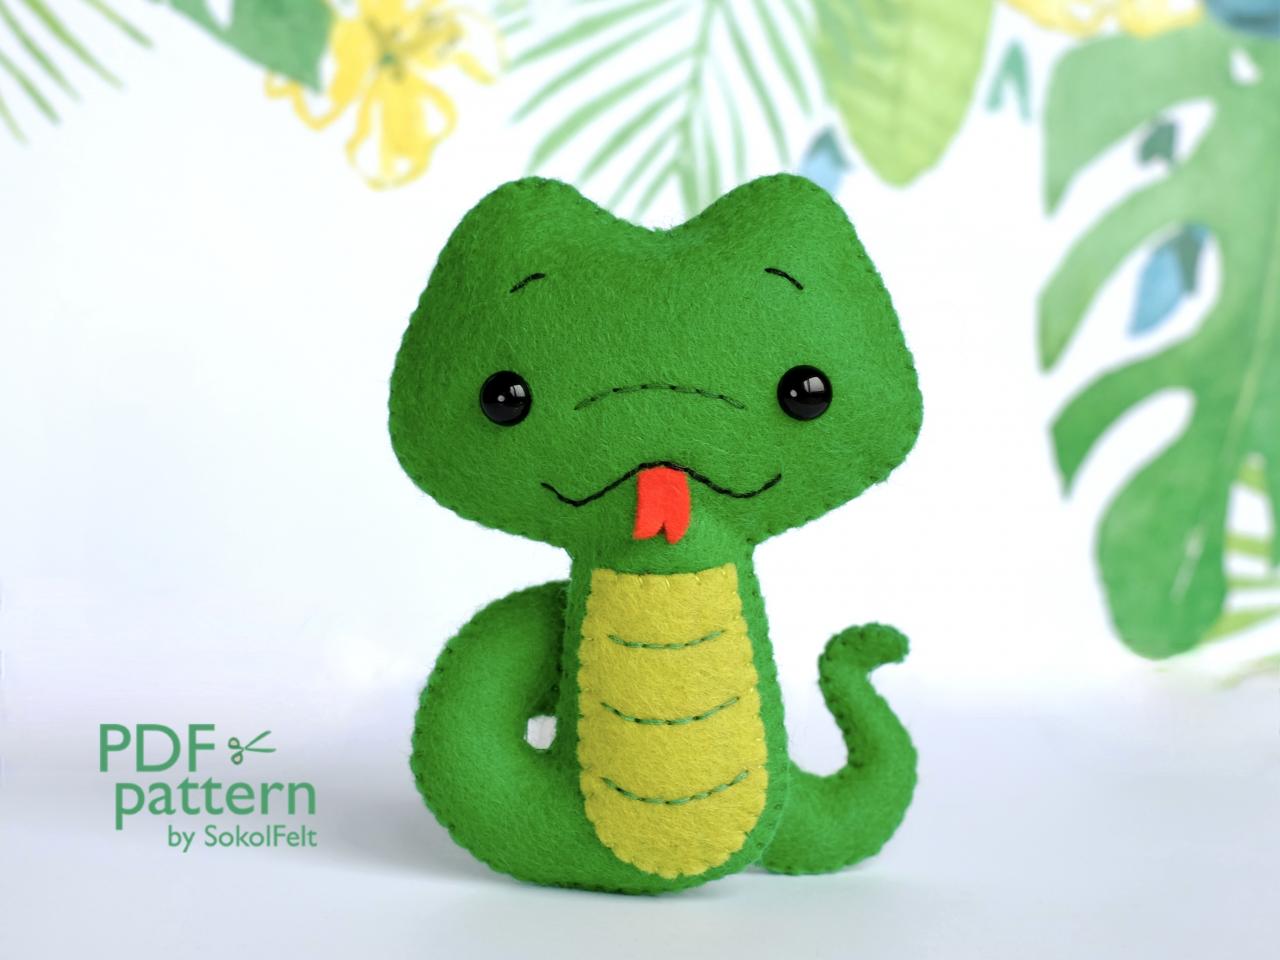 Little Snake Felt Toy Sewing Pdf And Svg Pattern, Felt Animal Pattern, Plush Toy Sewing Tutorial